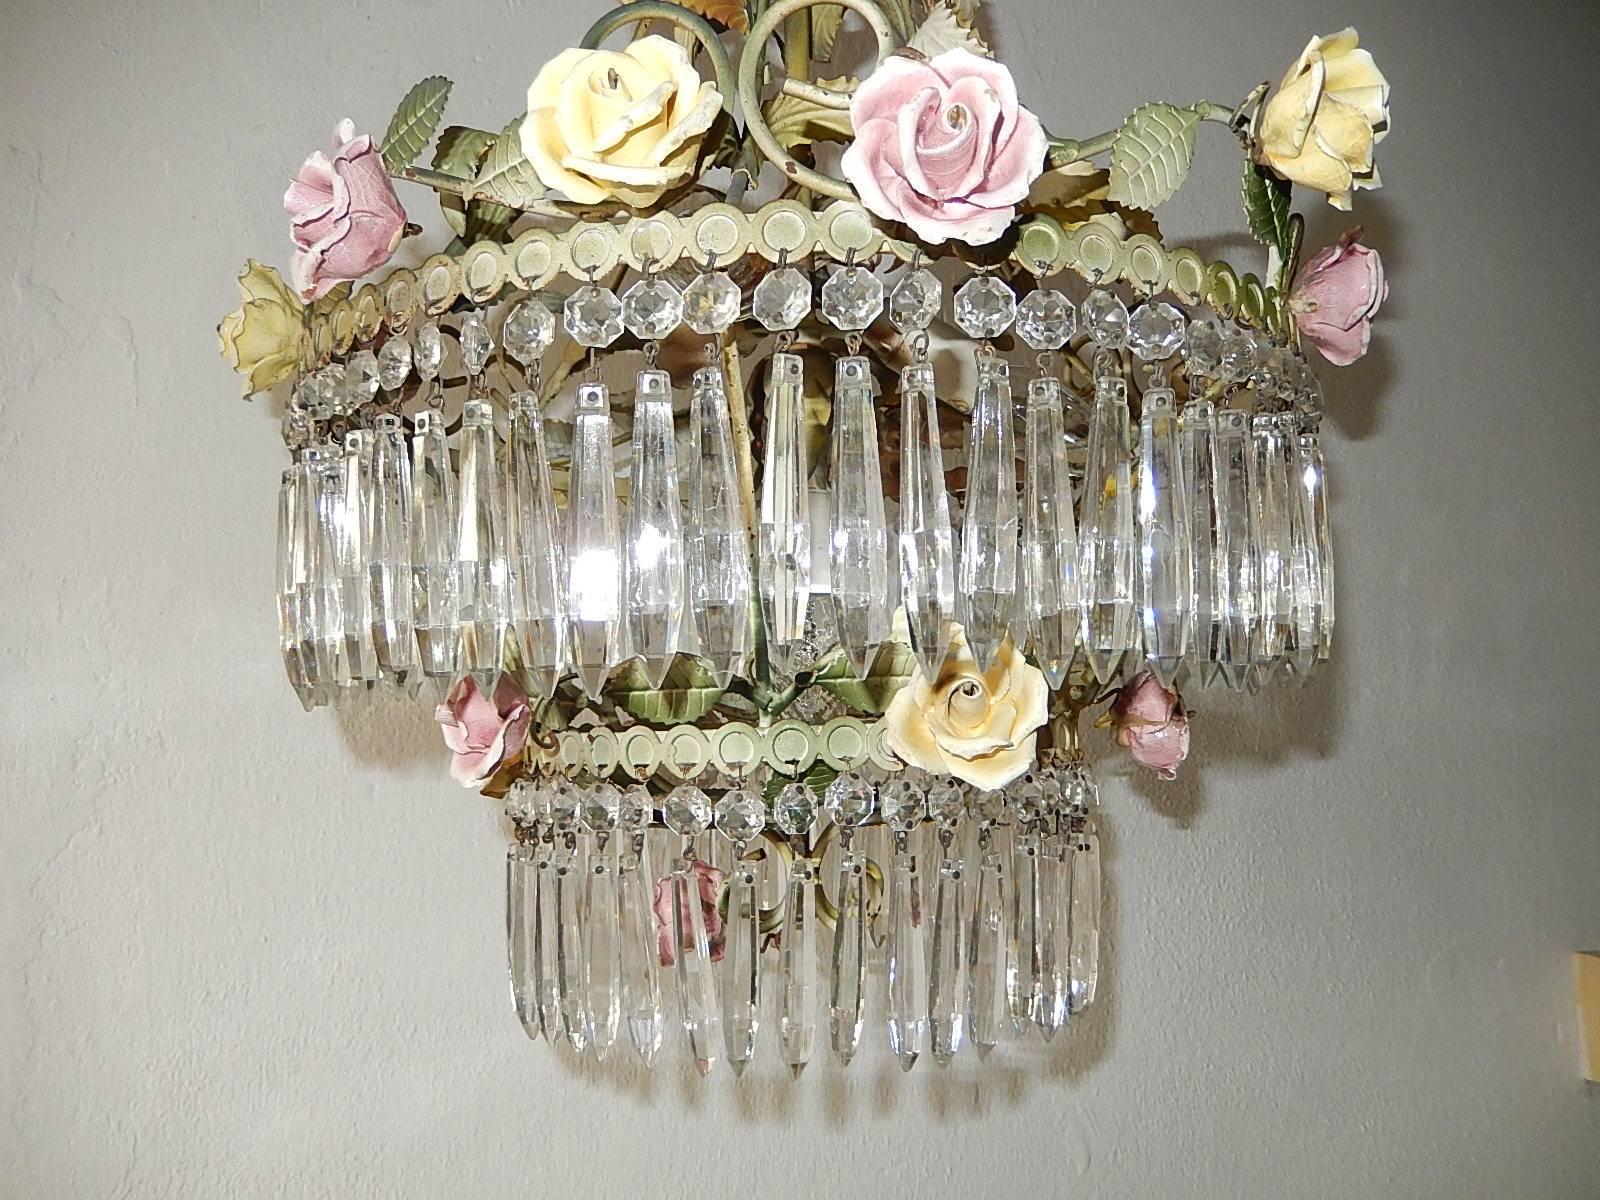 European French Tole Porcelain Roses and Crystal Chandelier